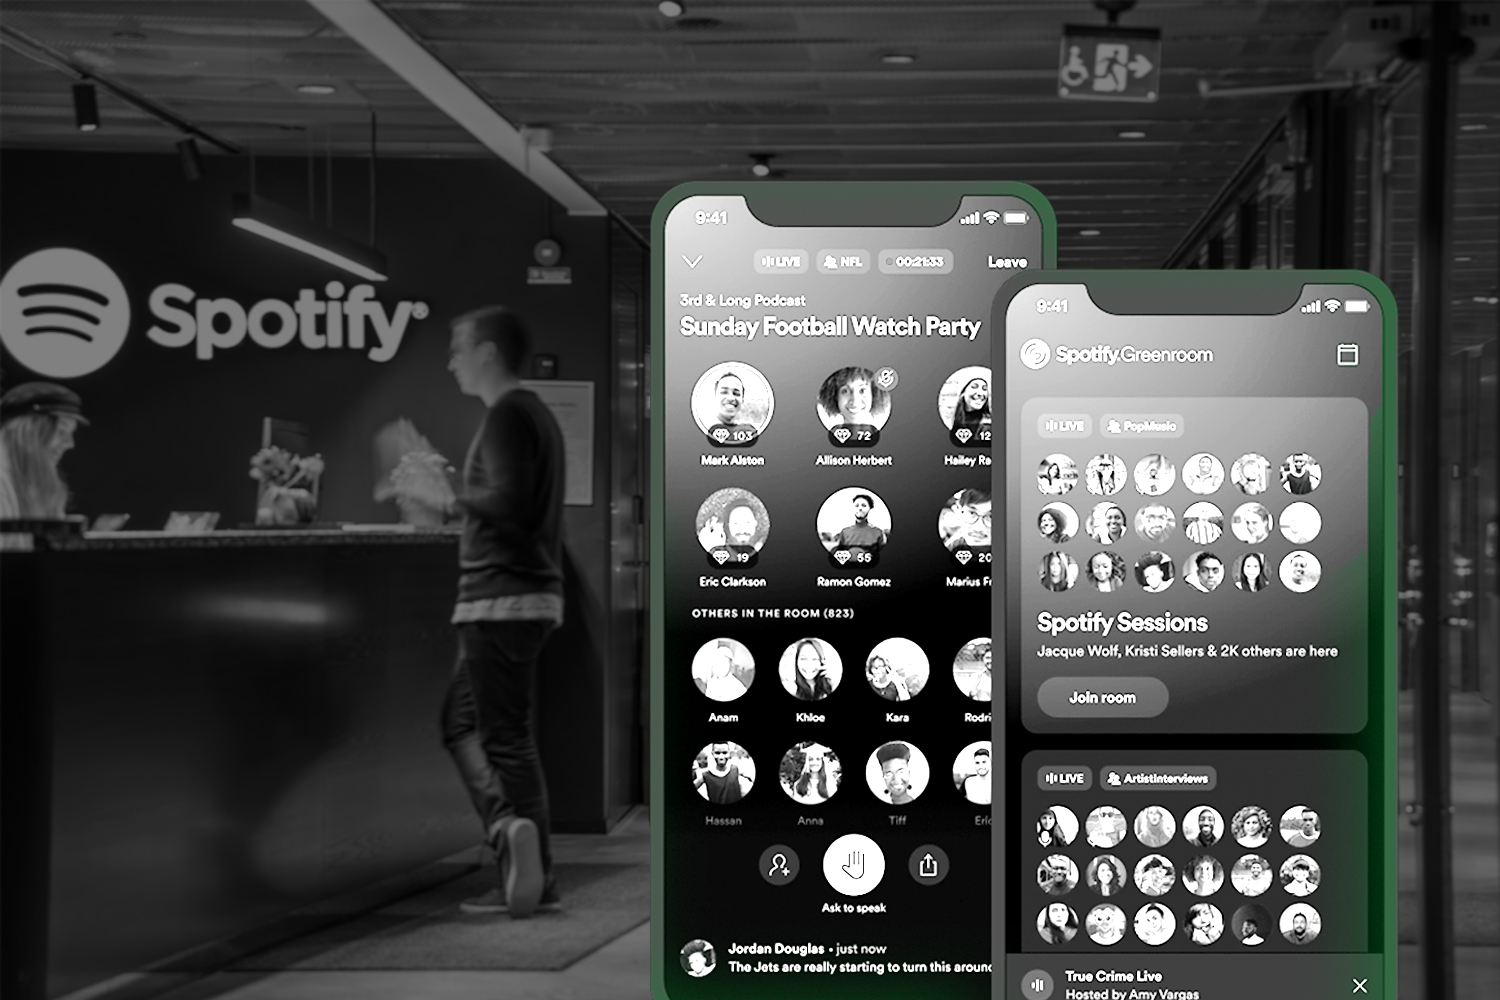 Spotify and Riot Games Team Up for an Official League of Legends Esports  Partnership — Spotify